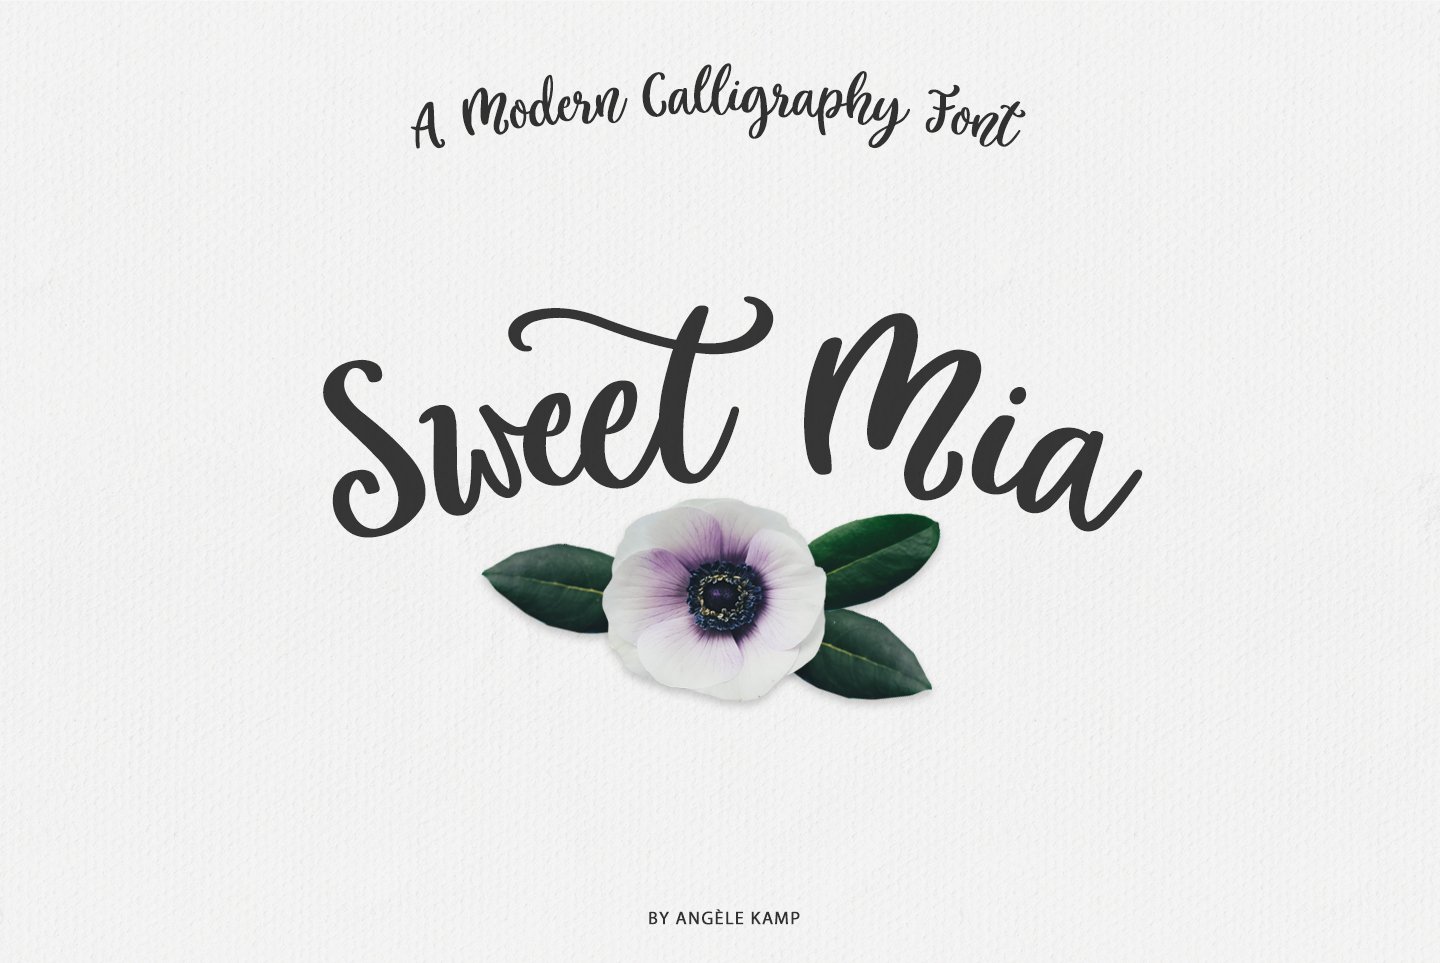 Sweet Mia modern calligraphy font cover image.